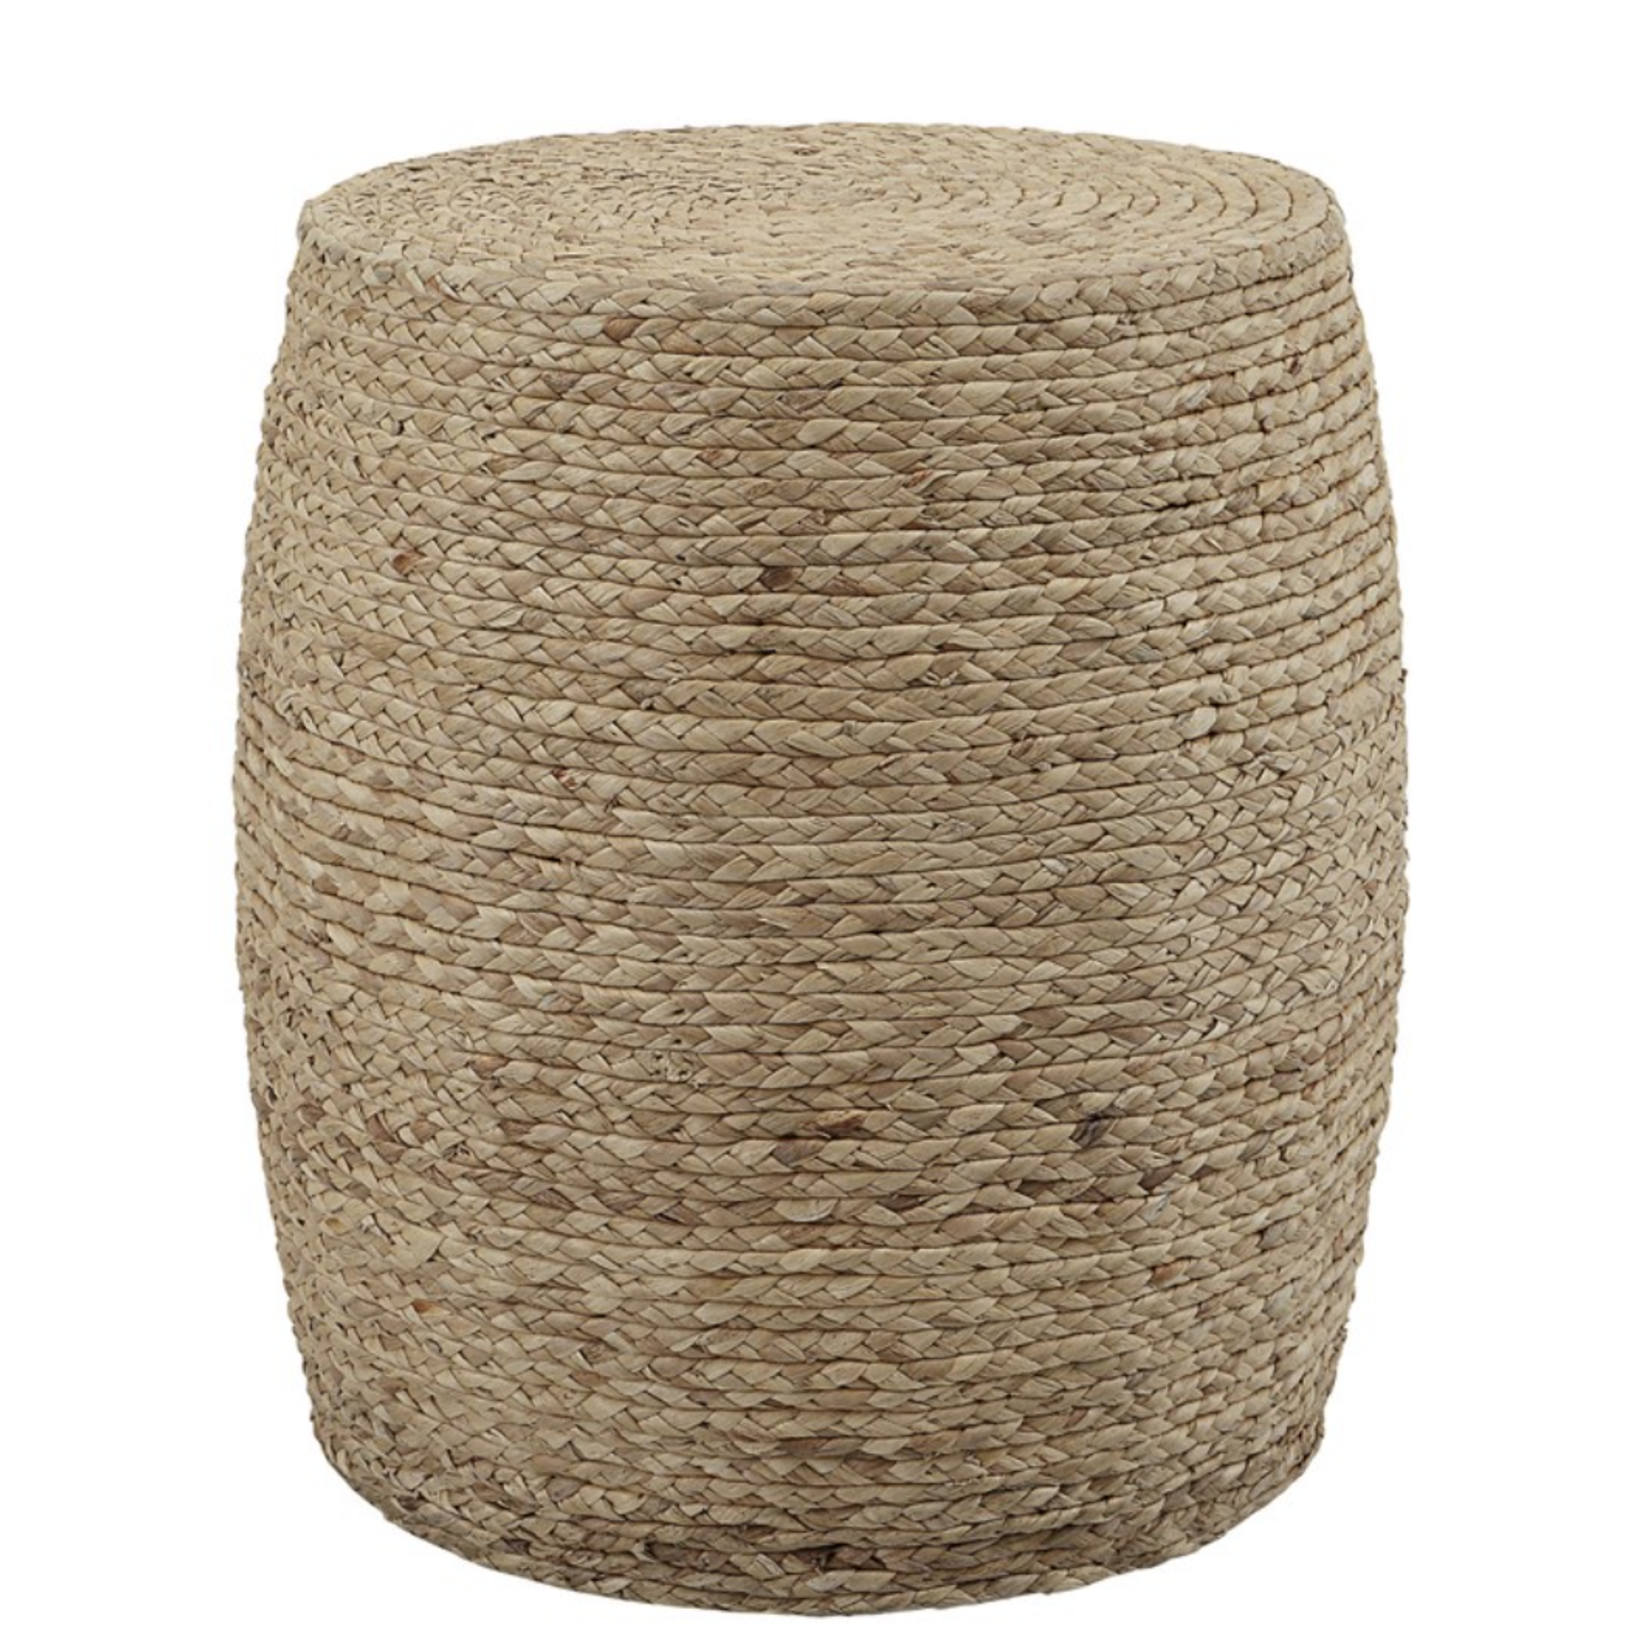 Outside The Box 16x19 Resort Natural Hand Braided Straw Accent Stool